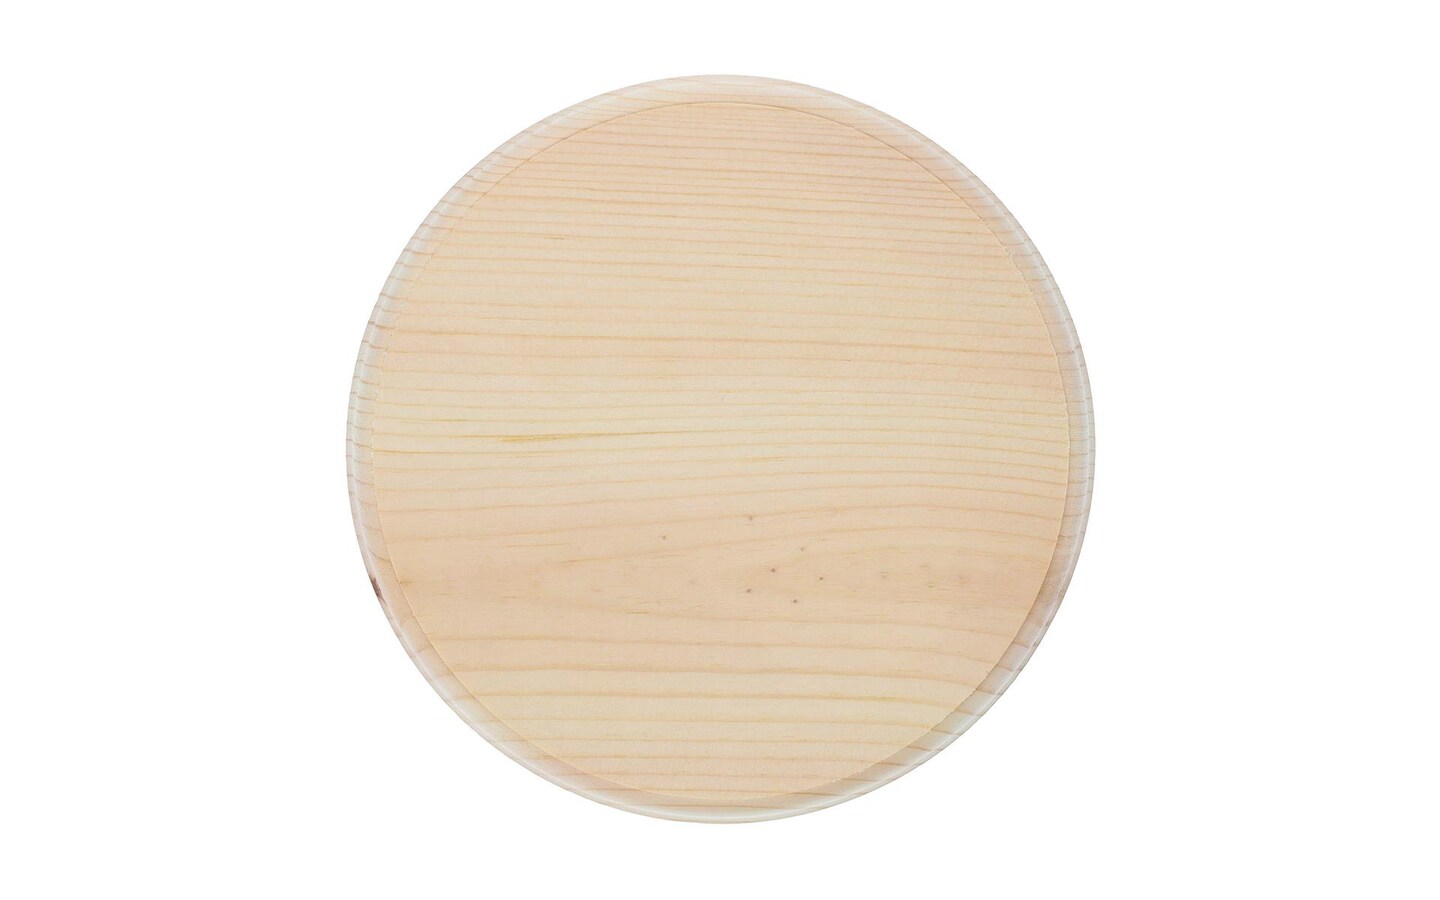 Oval Wooden Plaque, Unfinished Natural Pine Wood plaque, Great for